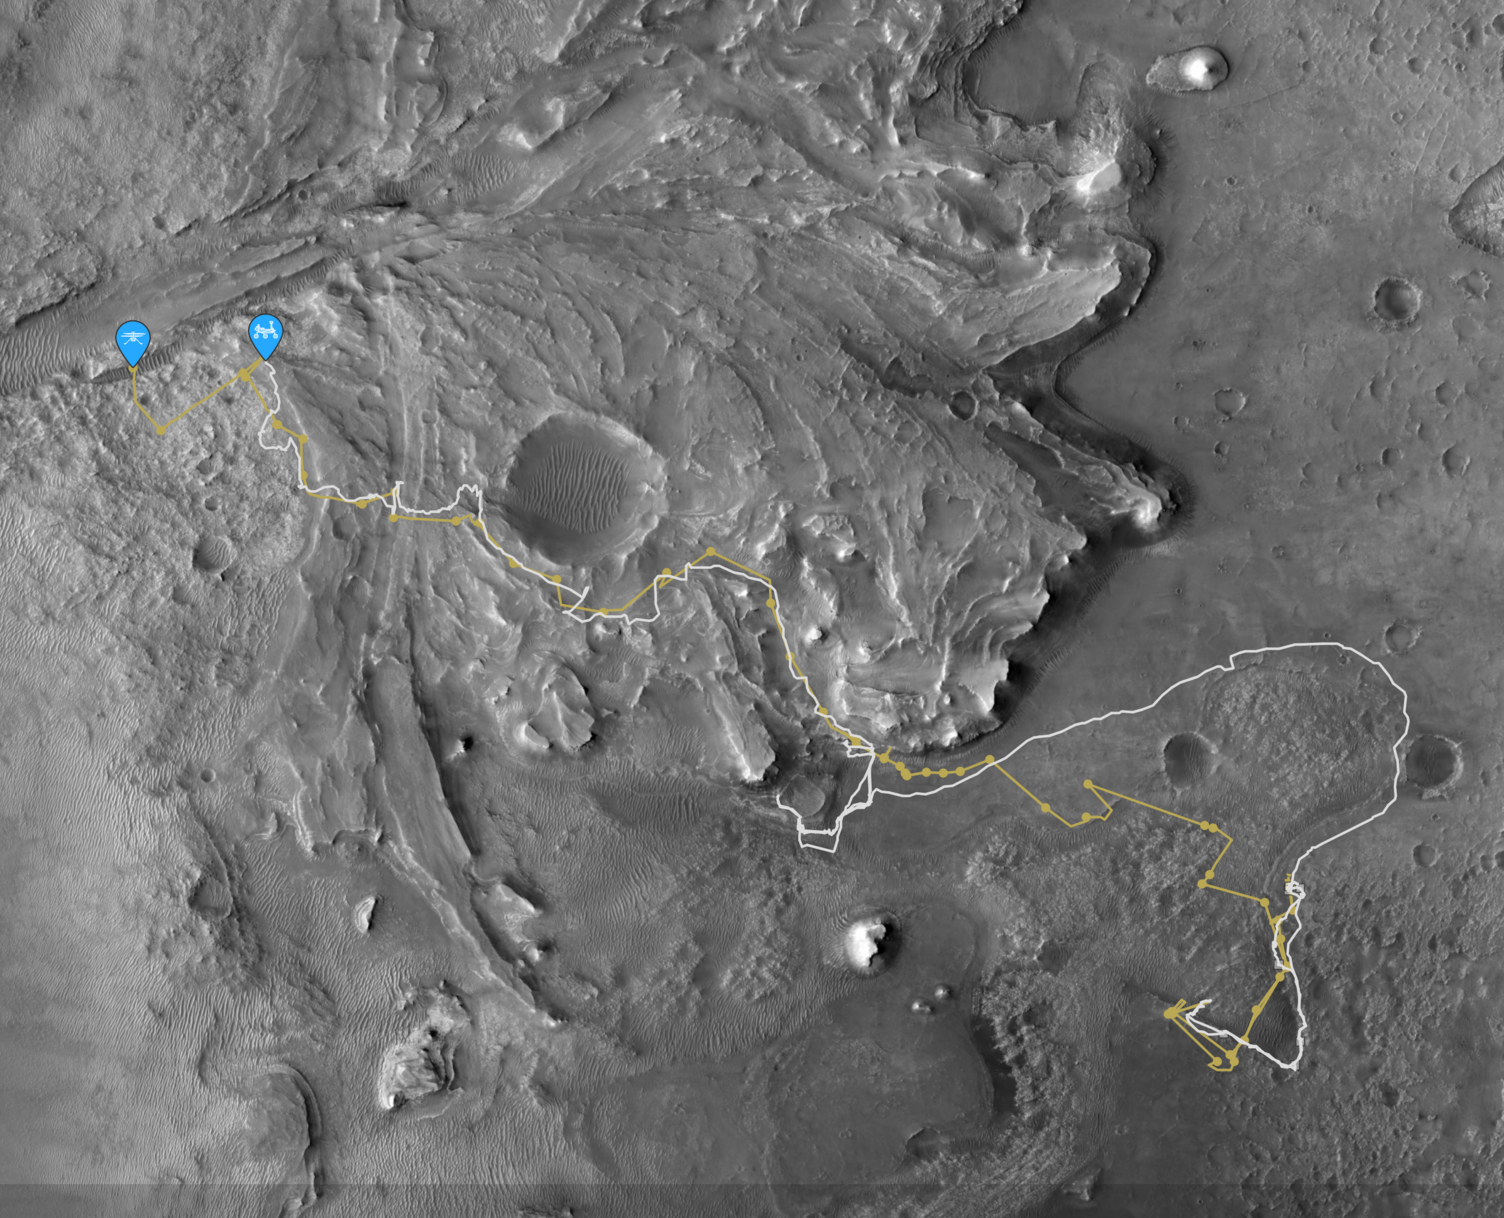 Routes of the Perseverance rover, white, and the Ingenuity helicopter, yellow, in Mars’ Jezero Crater